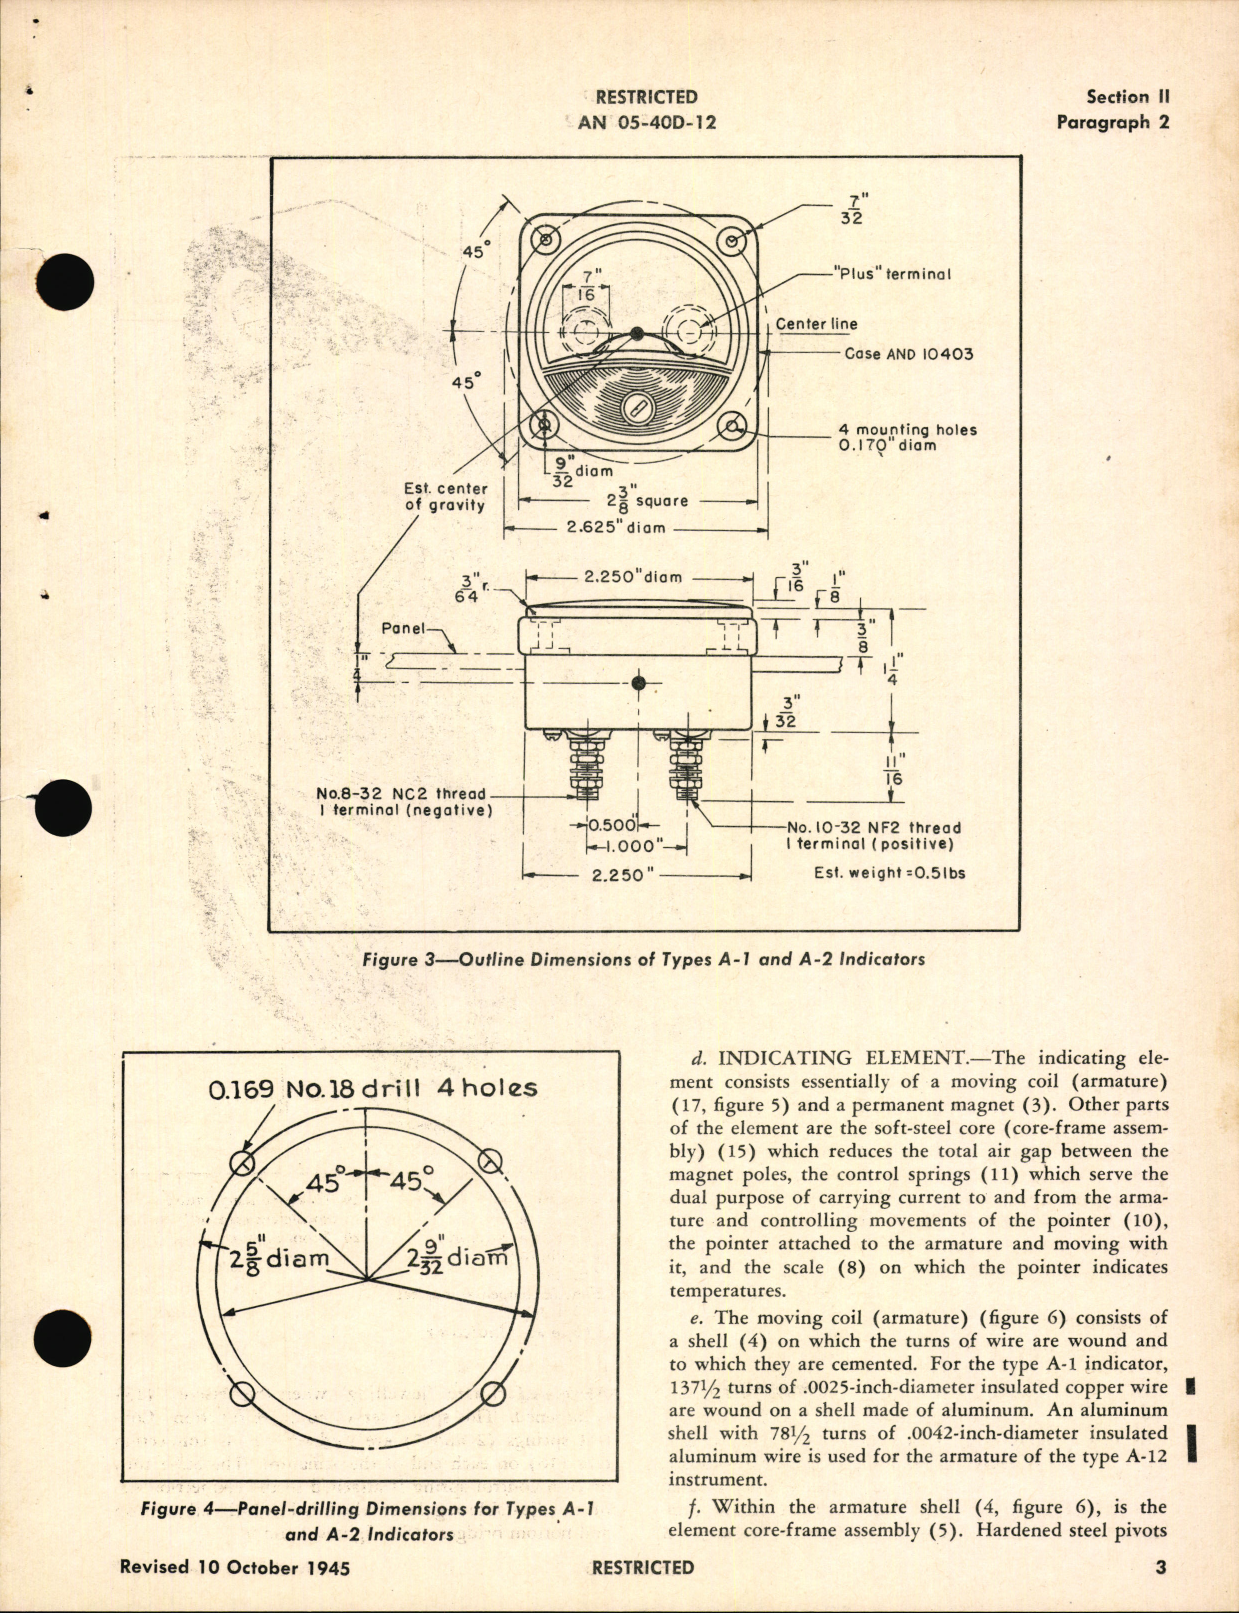 Sample page 9 from AirCorps Library document: Overhaul Instructions with Parts Catalog for Temperature Indicators Types A-1 and A-2